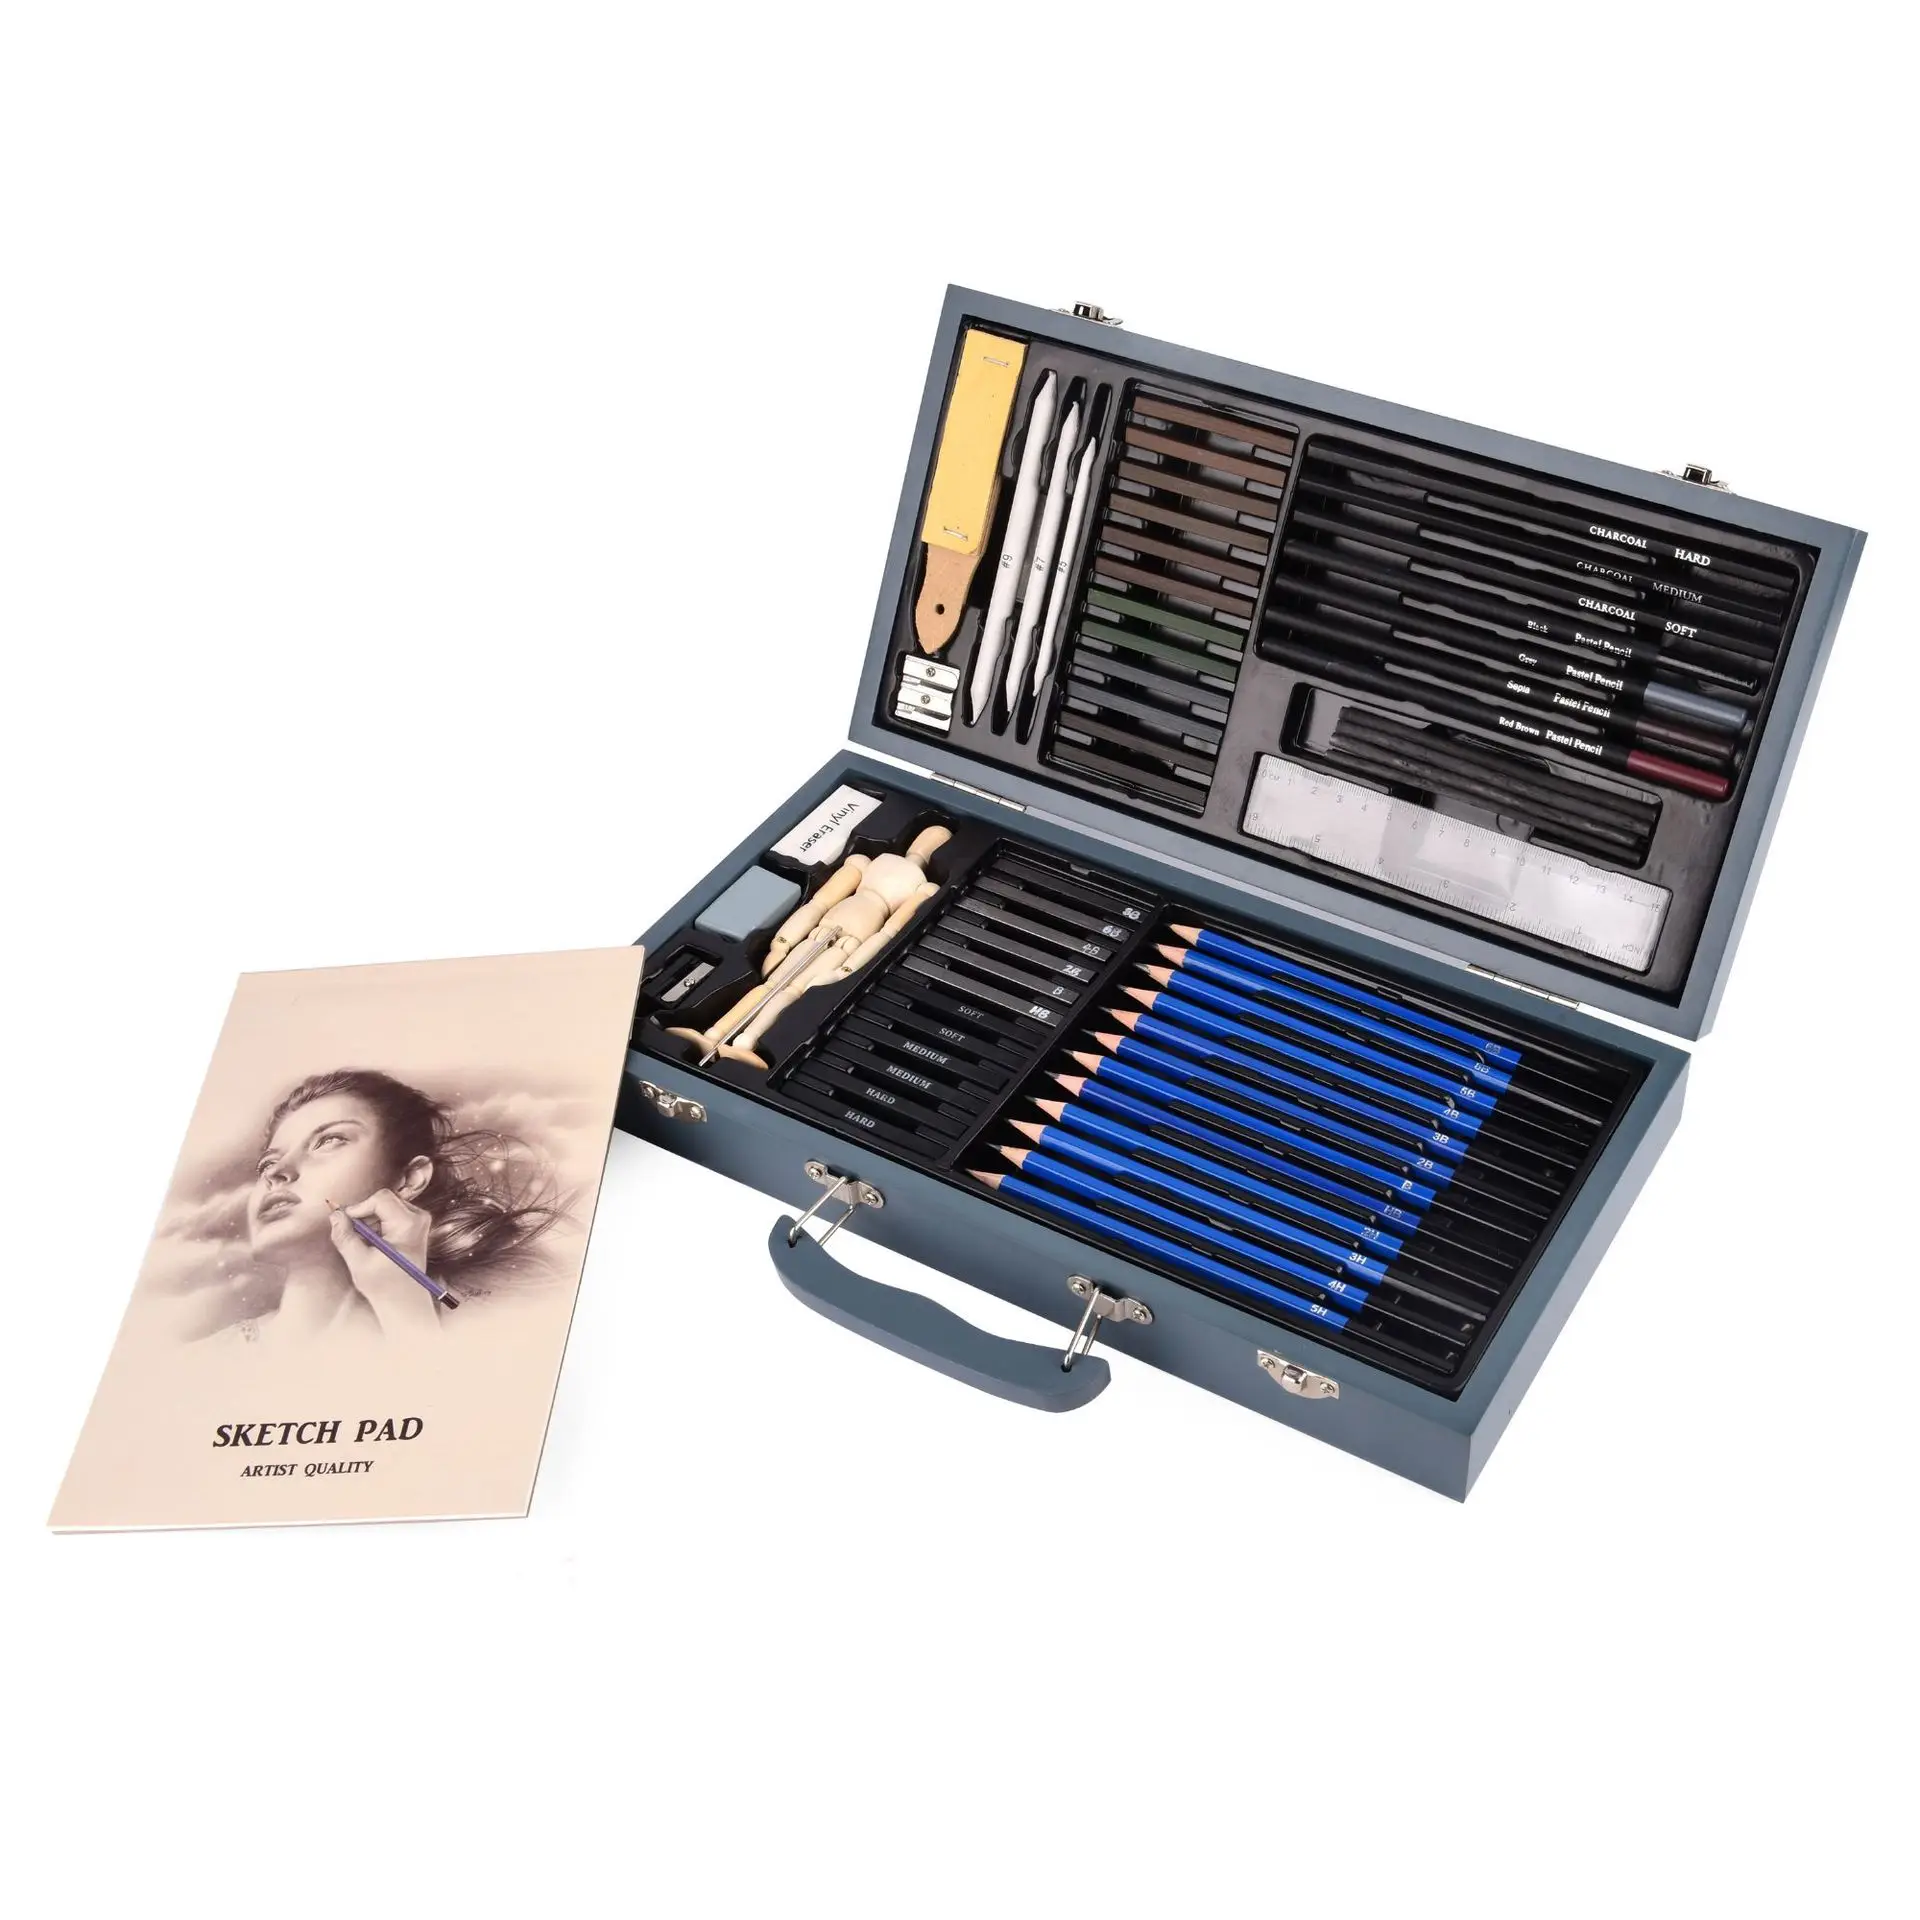 https://ae01.alicdn.com/kf/Scd0e95286896487d977daa1b74227d27w/60Pcs-Set-Professional-Sketch-Pencil-Charcoal-Brush-Wooden-Box-Sketch-Tools-Wooden-Man-Ruler-Drawing-Painting.jpg